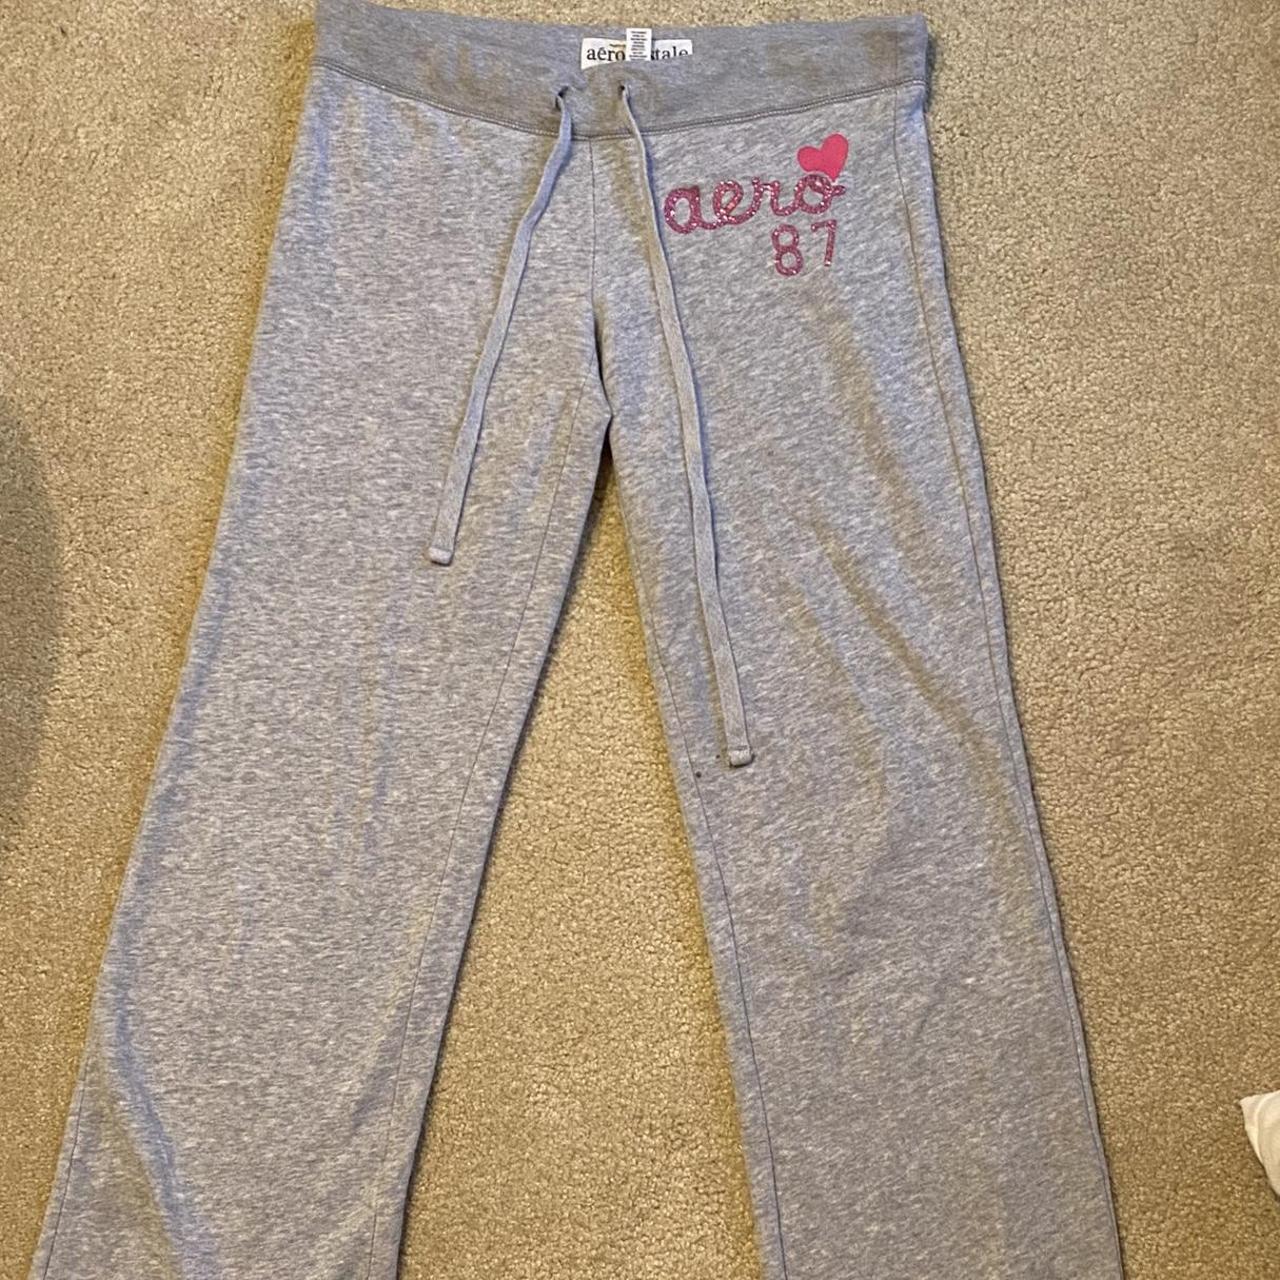 Aeropostale Women's Grey and Pink Joggers-tracksuits | Depop